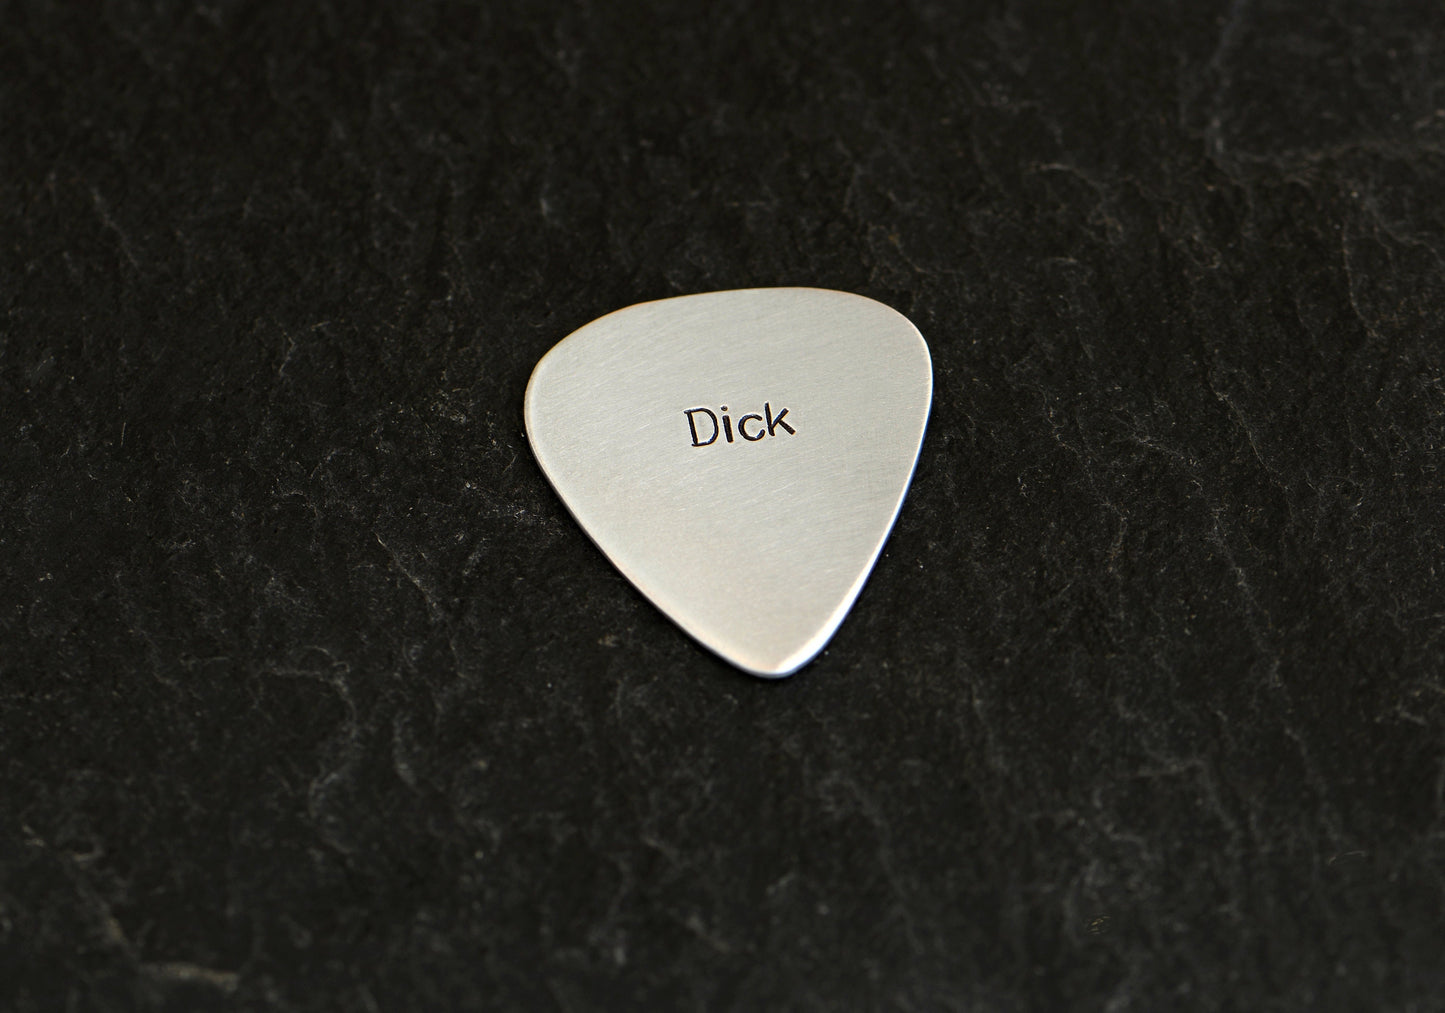 Extra Thick Dick Pick Aluminum Guitar Pick - 14 gauge and playable